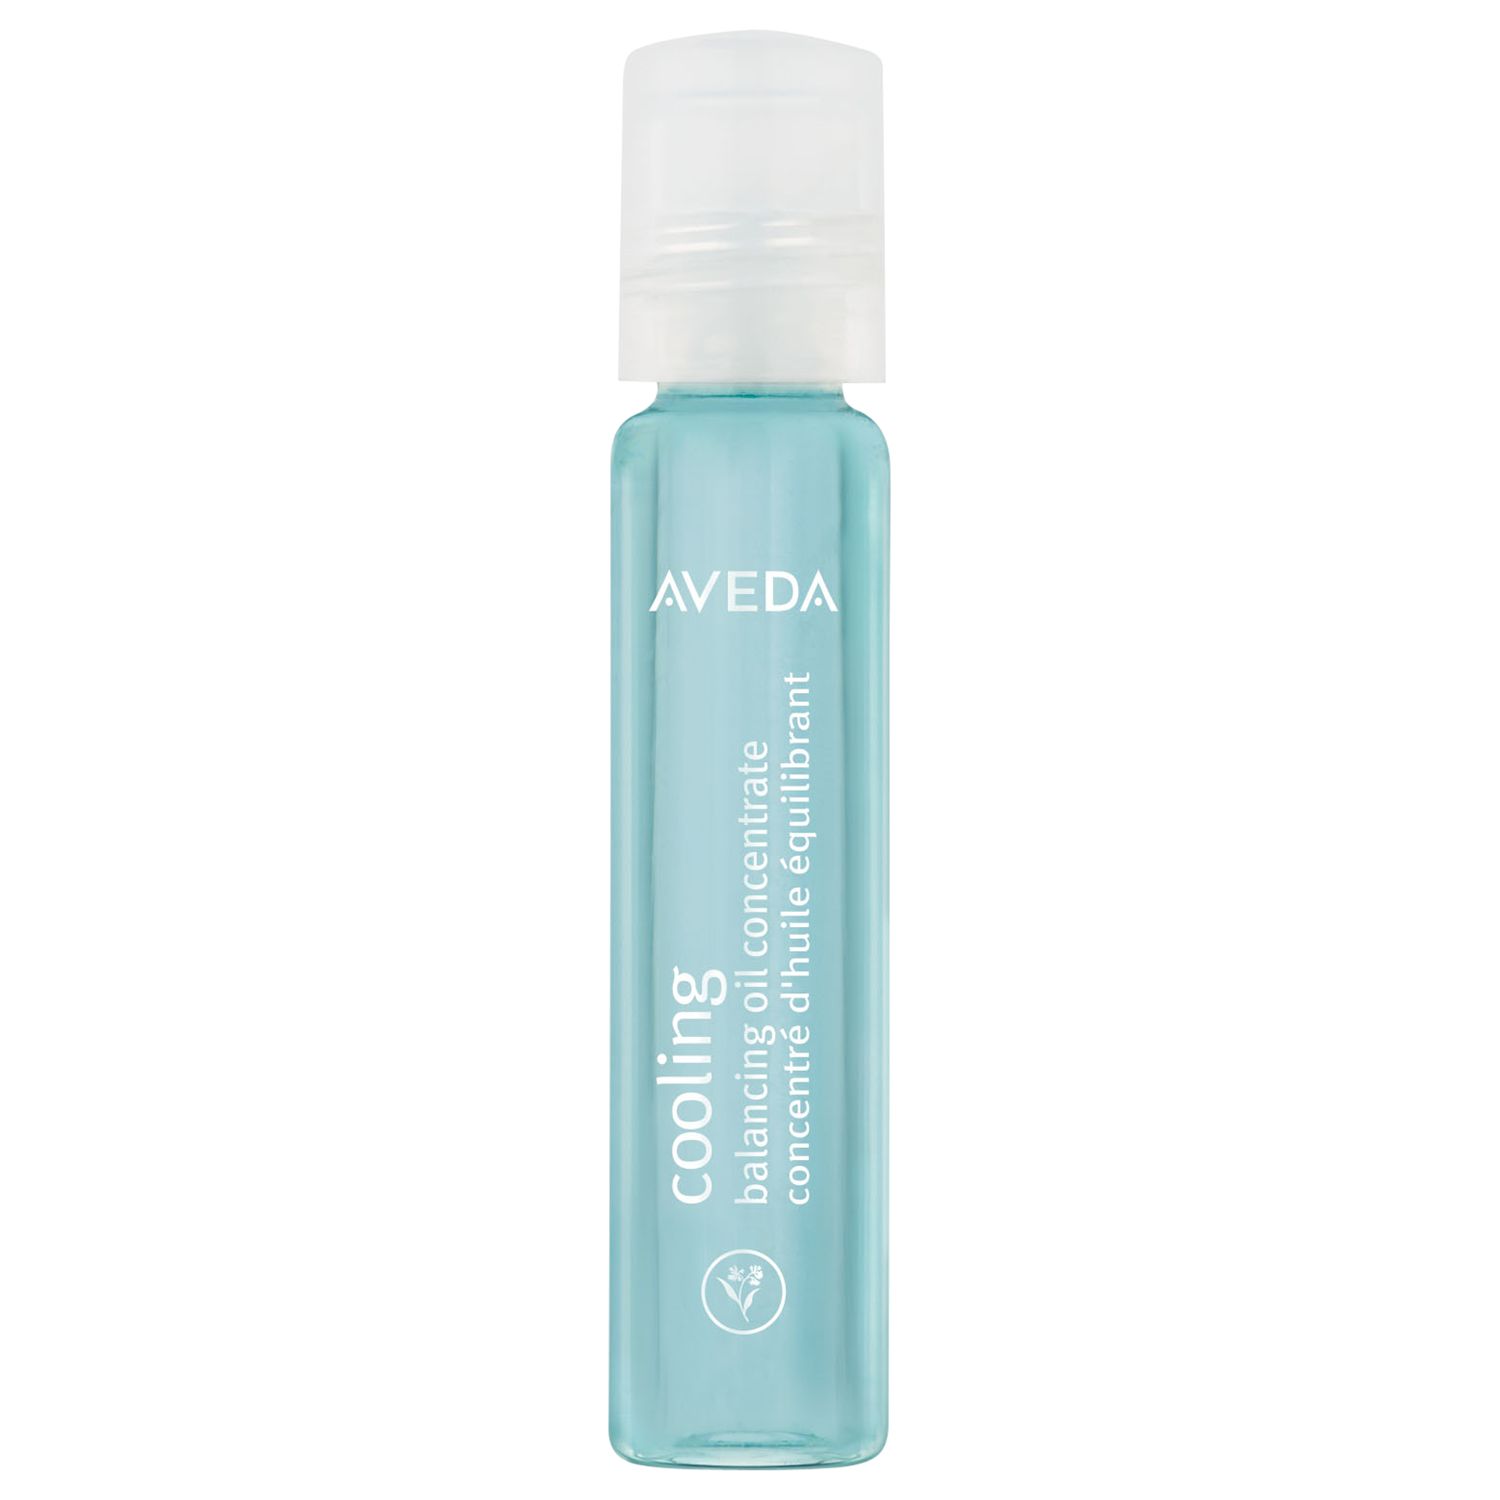 Aveda Cooling Muscle Relief Oil Rollerball, 7ml 1